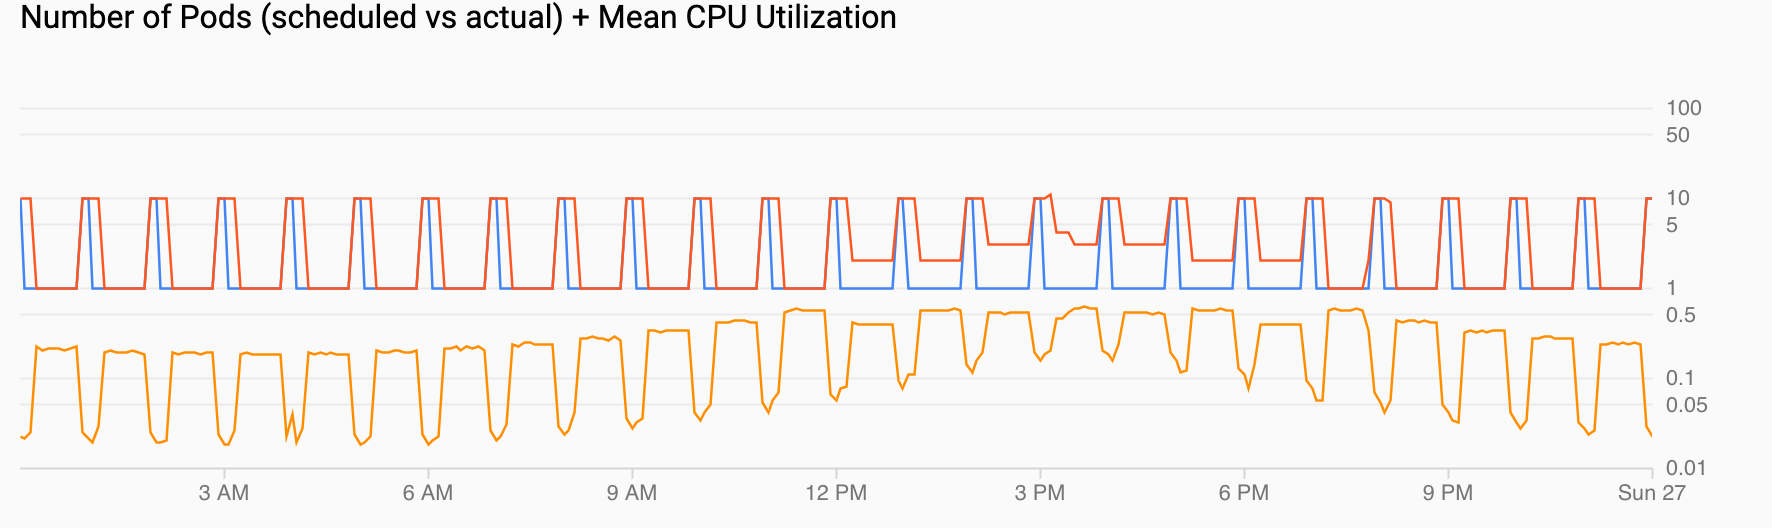 2 graphs. One shows demand for Pods with demand spiking every hour. The other shows that CPU utilization goes up and down, but tops off at the configured high value.